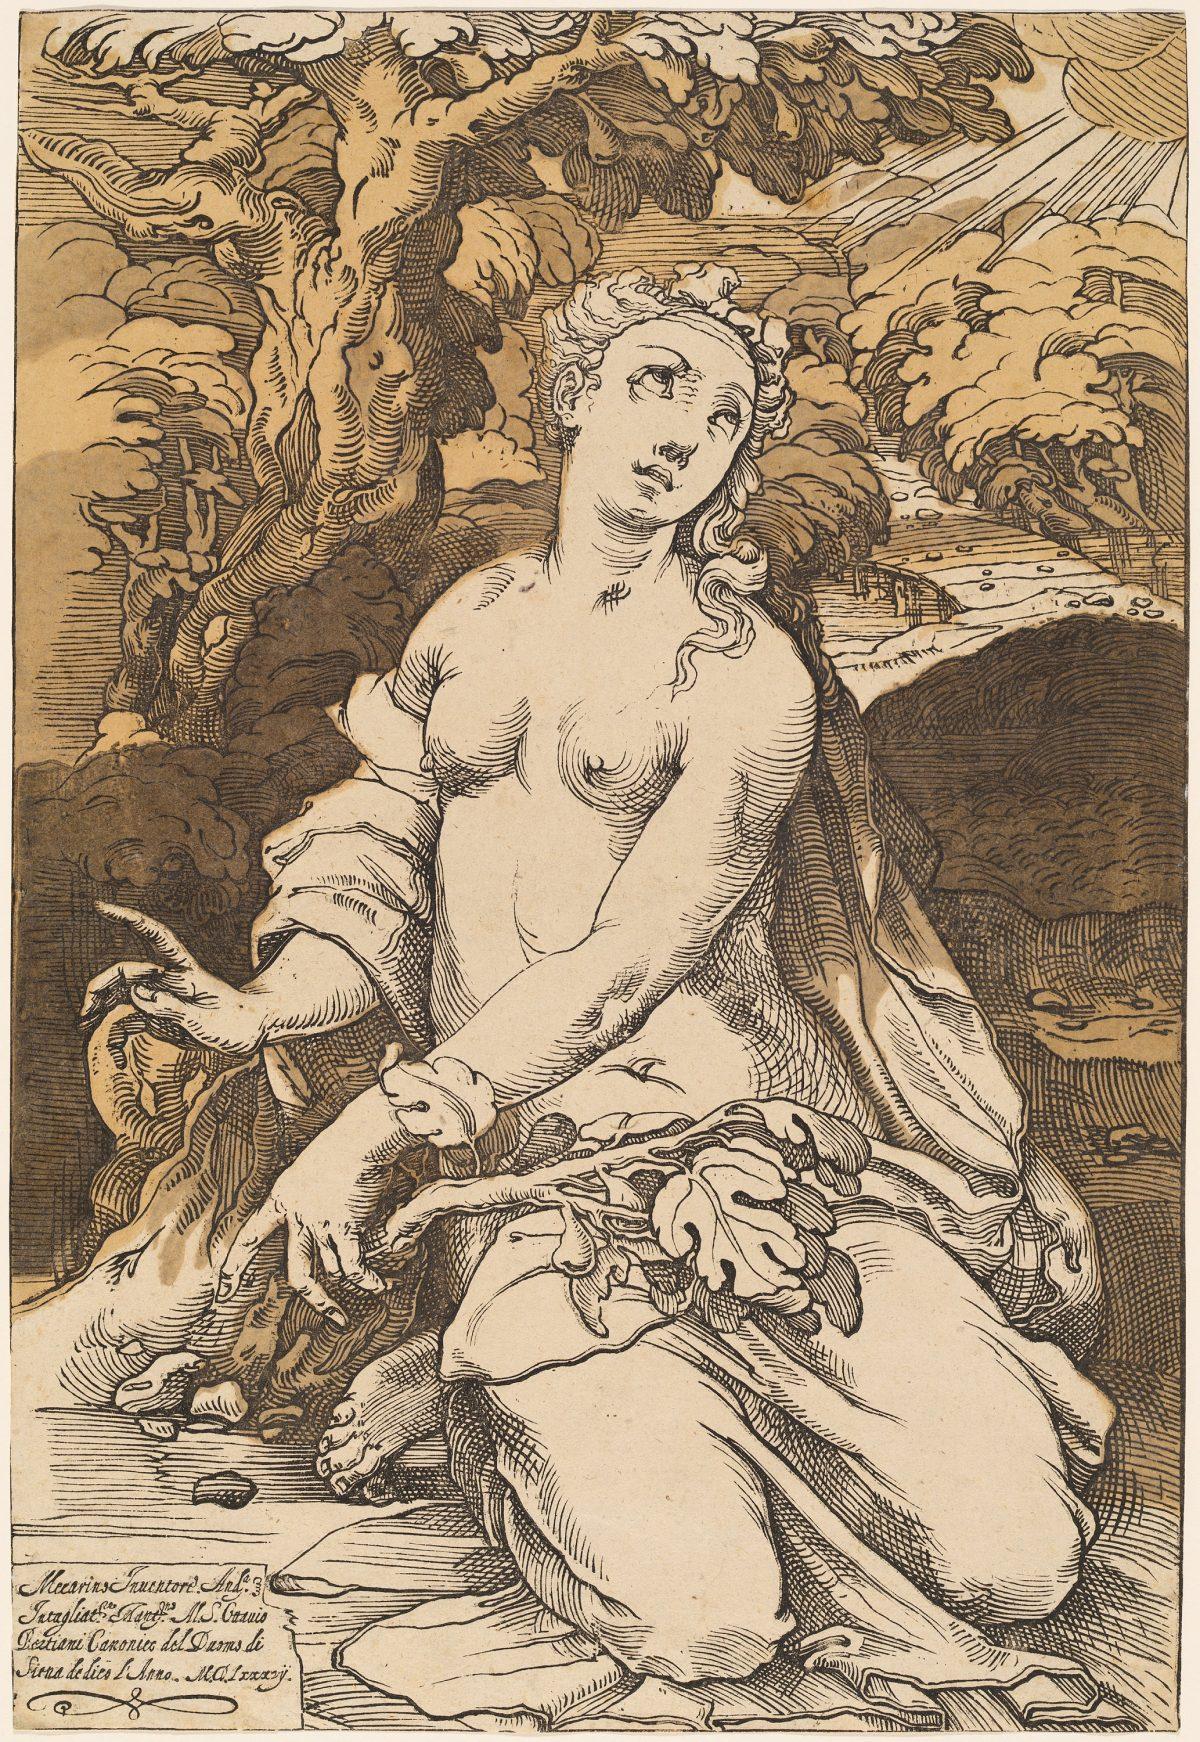 "Eve," 1587, by Andrea Andreani, after Domenico Beccafumi. Chiaroscuro woodcut from four blocks in ochre, gray-brown, dark brown, and black, 18 1/8 inches by 12 3/8 inches. Andrew W. Mellon Fund. (National Gallery of Art)